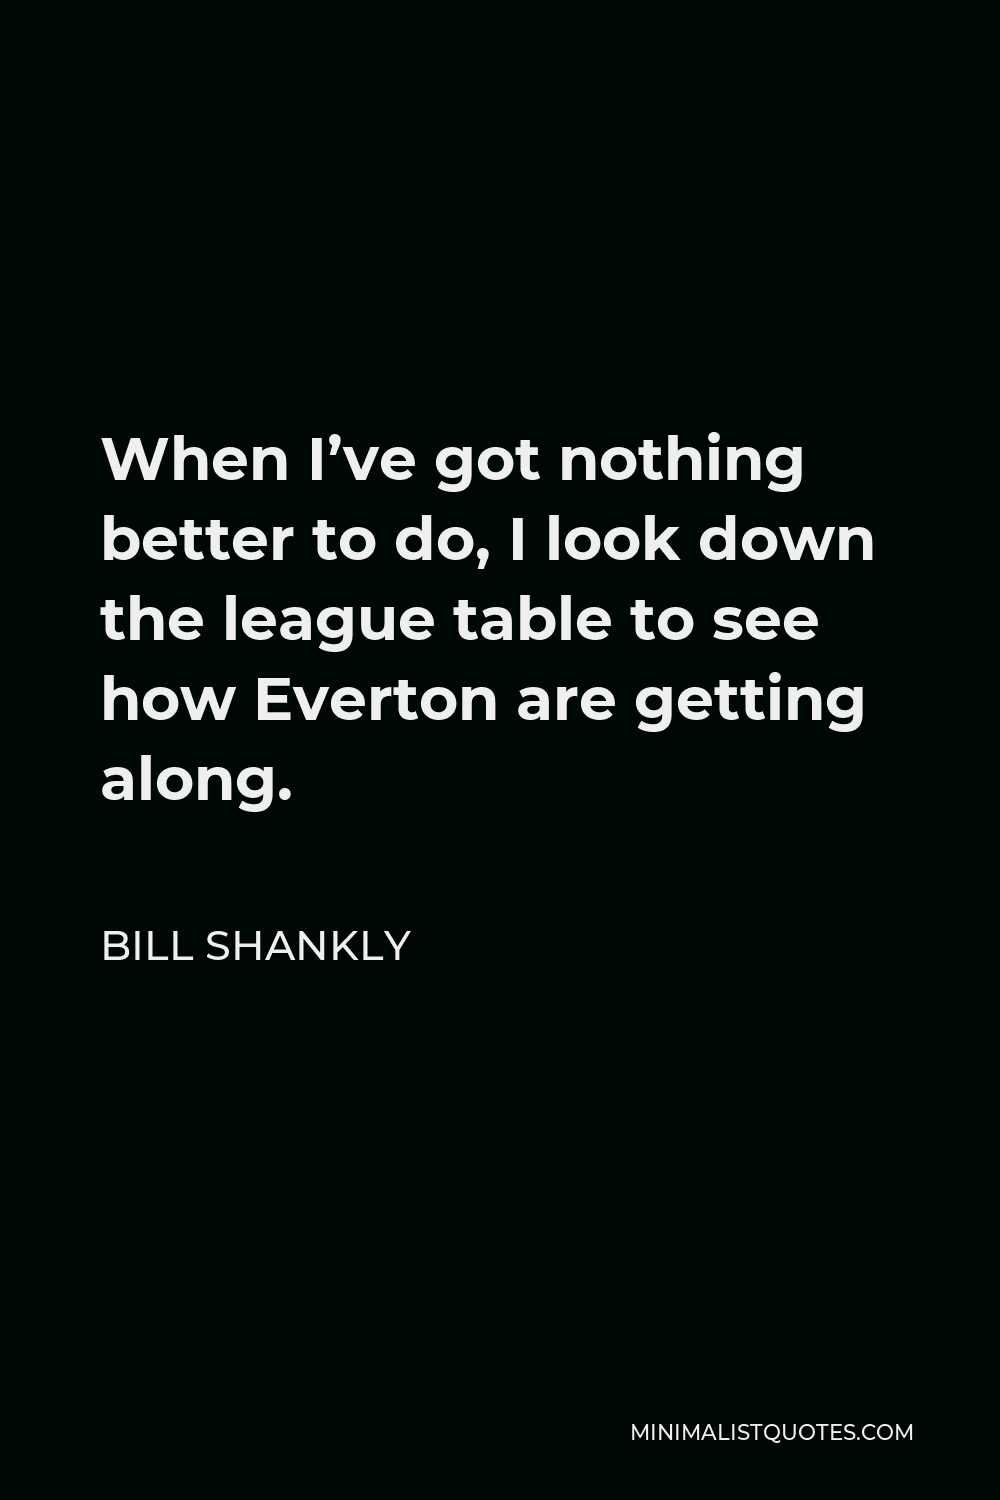 Bill Shankly Quote - When I’ve got nothing better to do, I look down the league table to see how Everton are getting along.